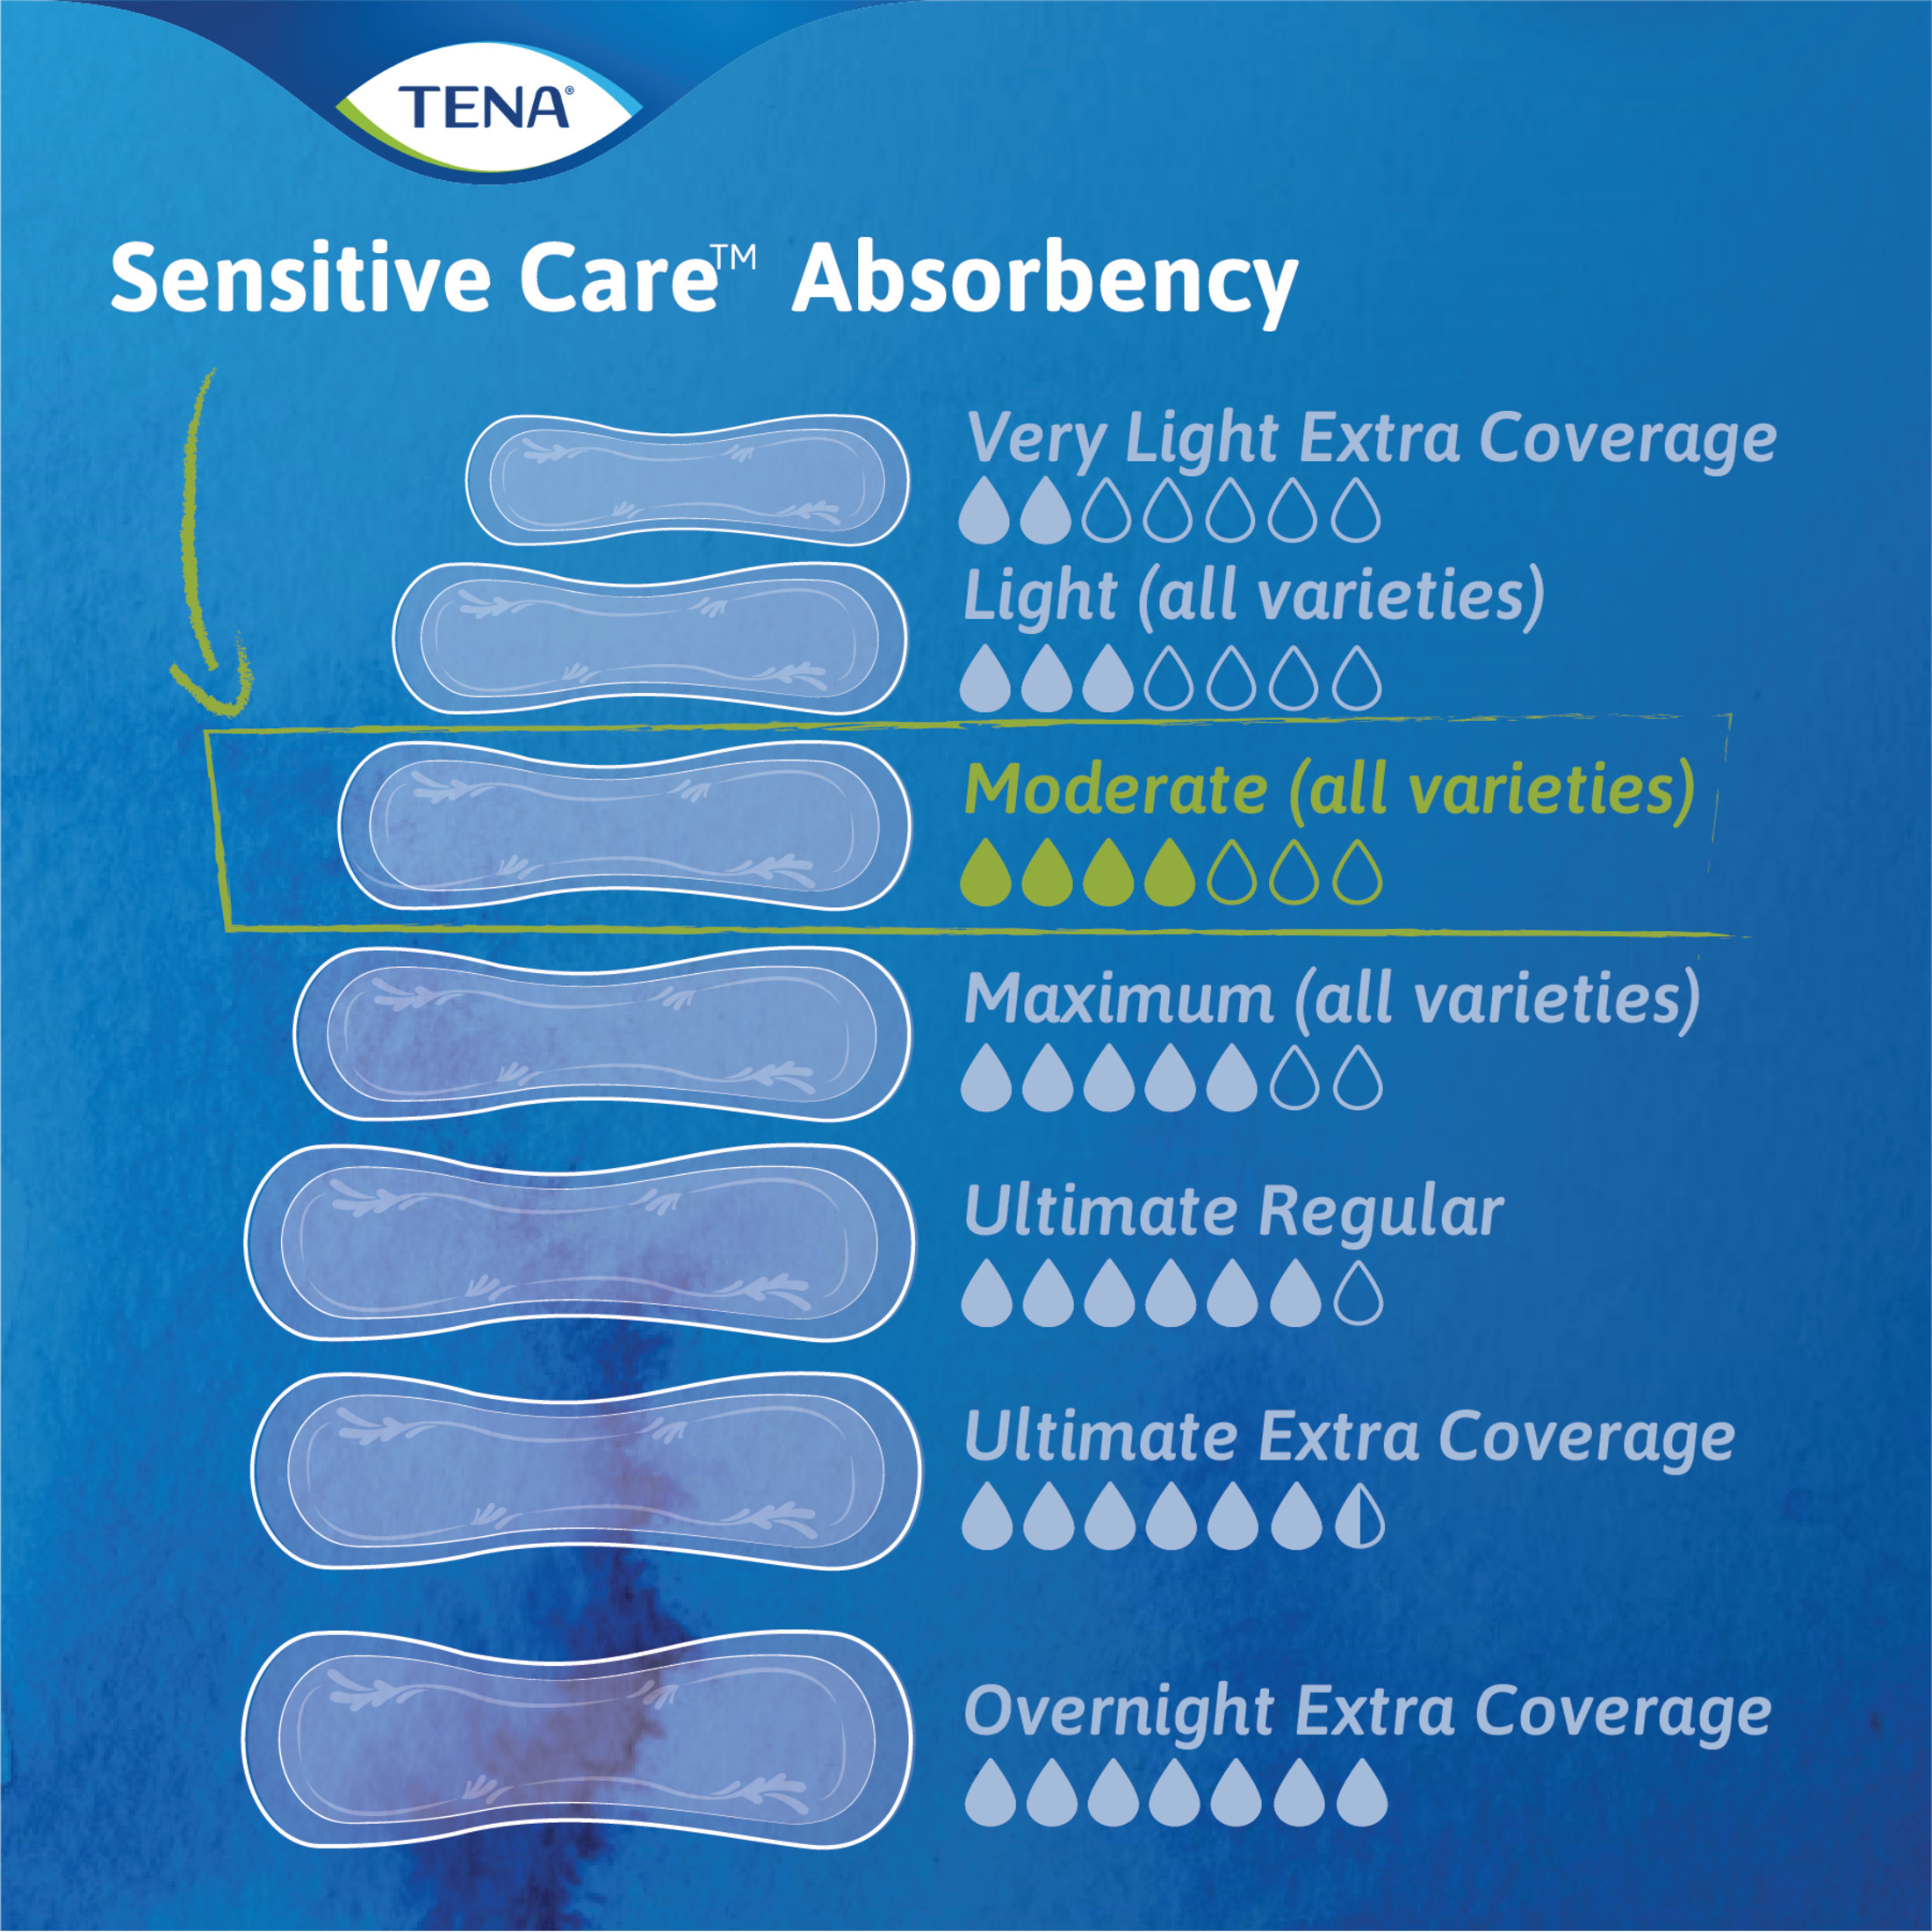 Tena Sensitive Care Extra Coverage Moderate Absorbency Incontinence Pad, 60ct - image 5 of 7